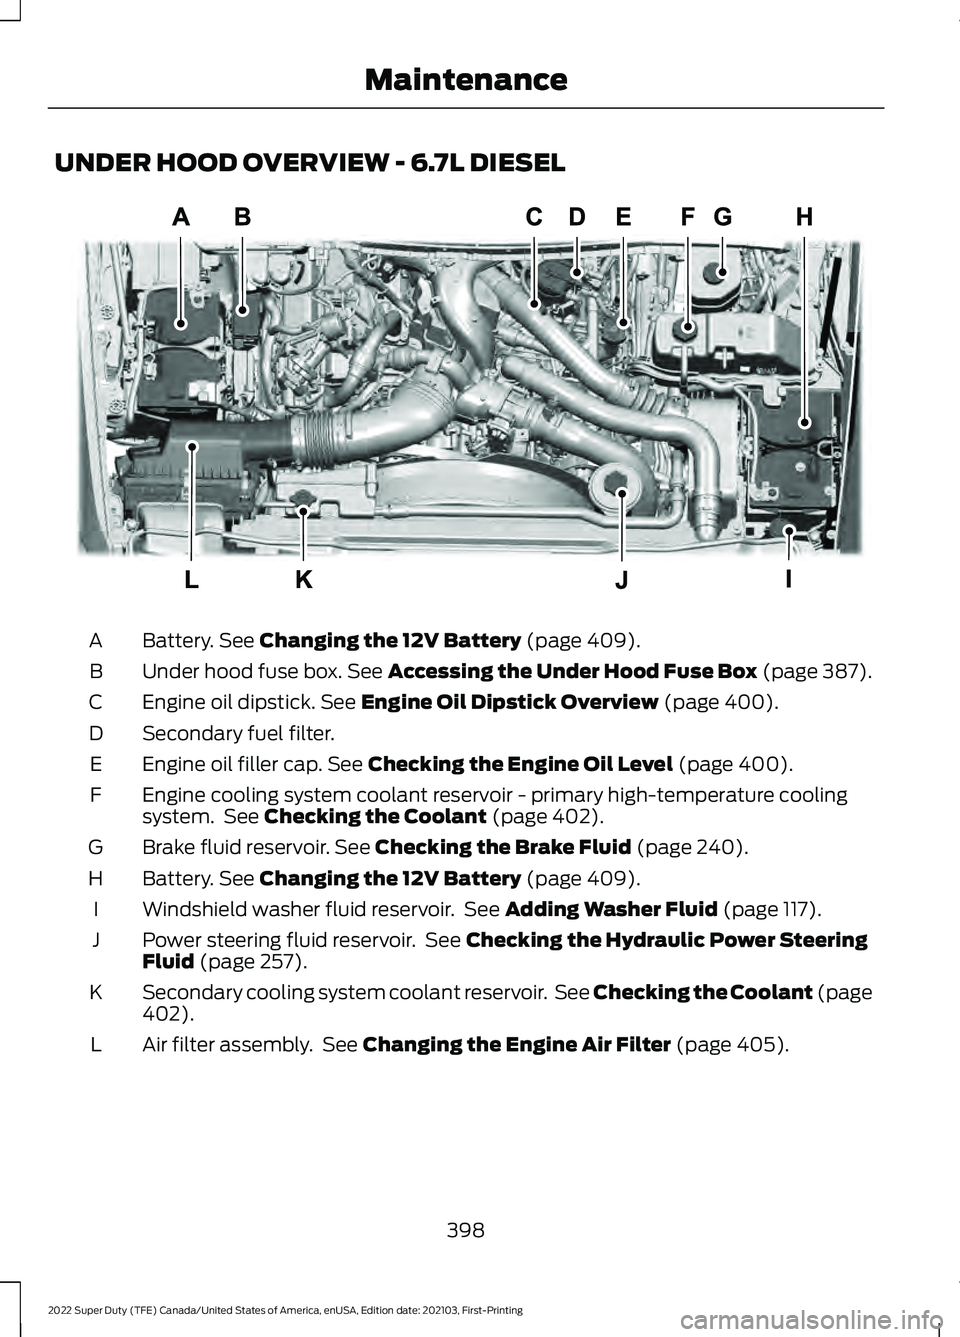 FORD F-550 2022  Owners Manual UNDER HOOD OVERVIEW - 6.7L DIESEL
Battery. See Changing the 12V Battery (page 409).
A
Under hood fuse box.
 See Accessing the Under Hood Fuse Box (page 387).
B
Engine oil dipstick.
 See Engine Oil Dip